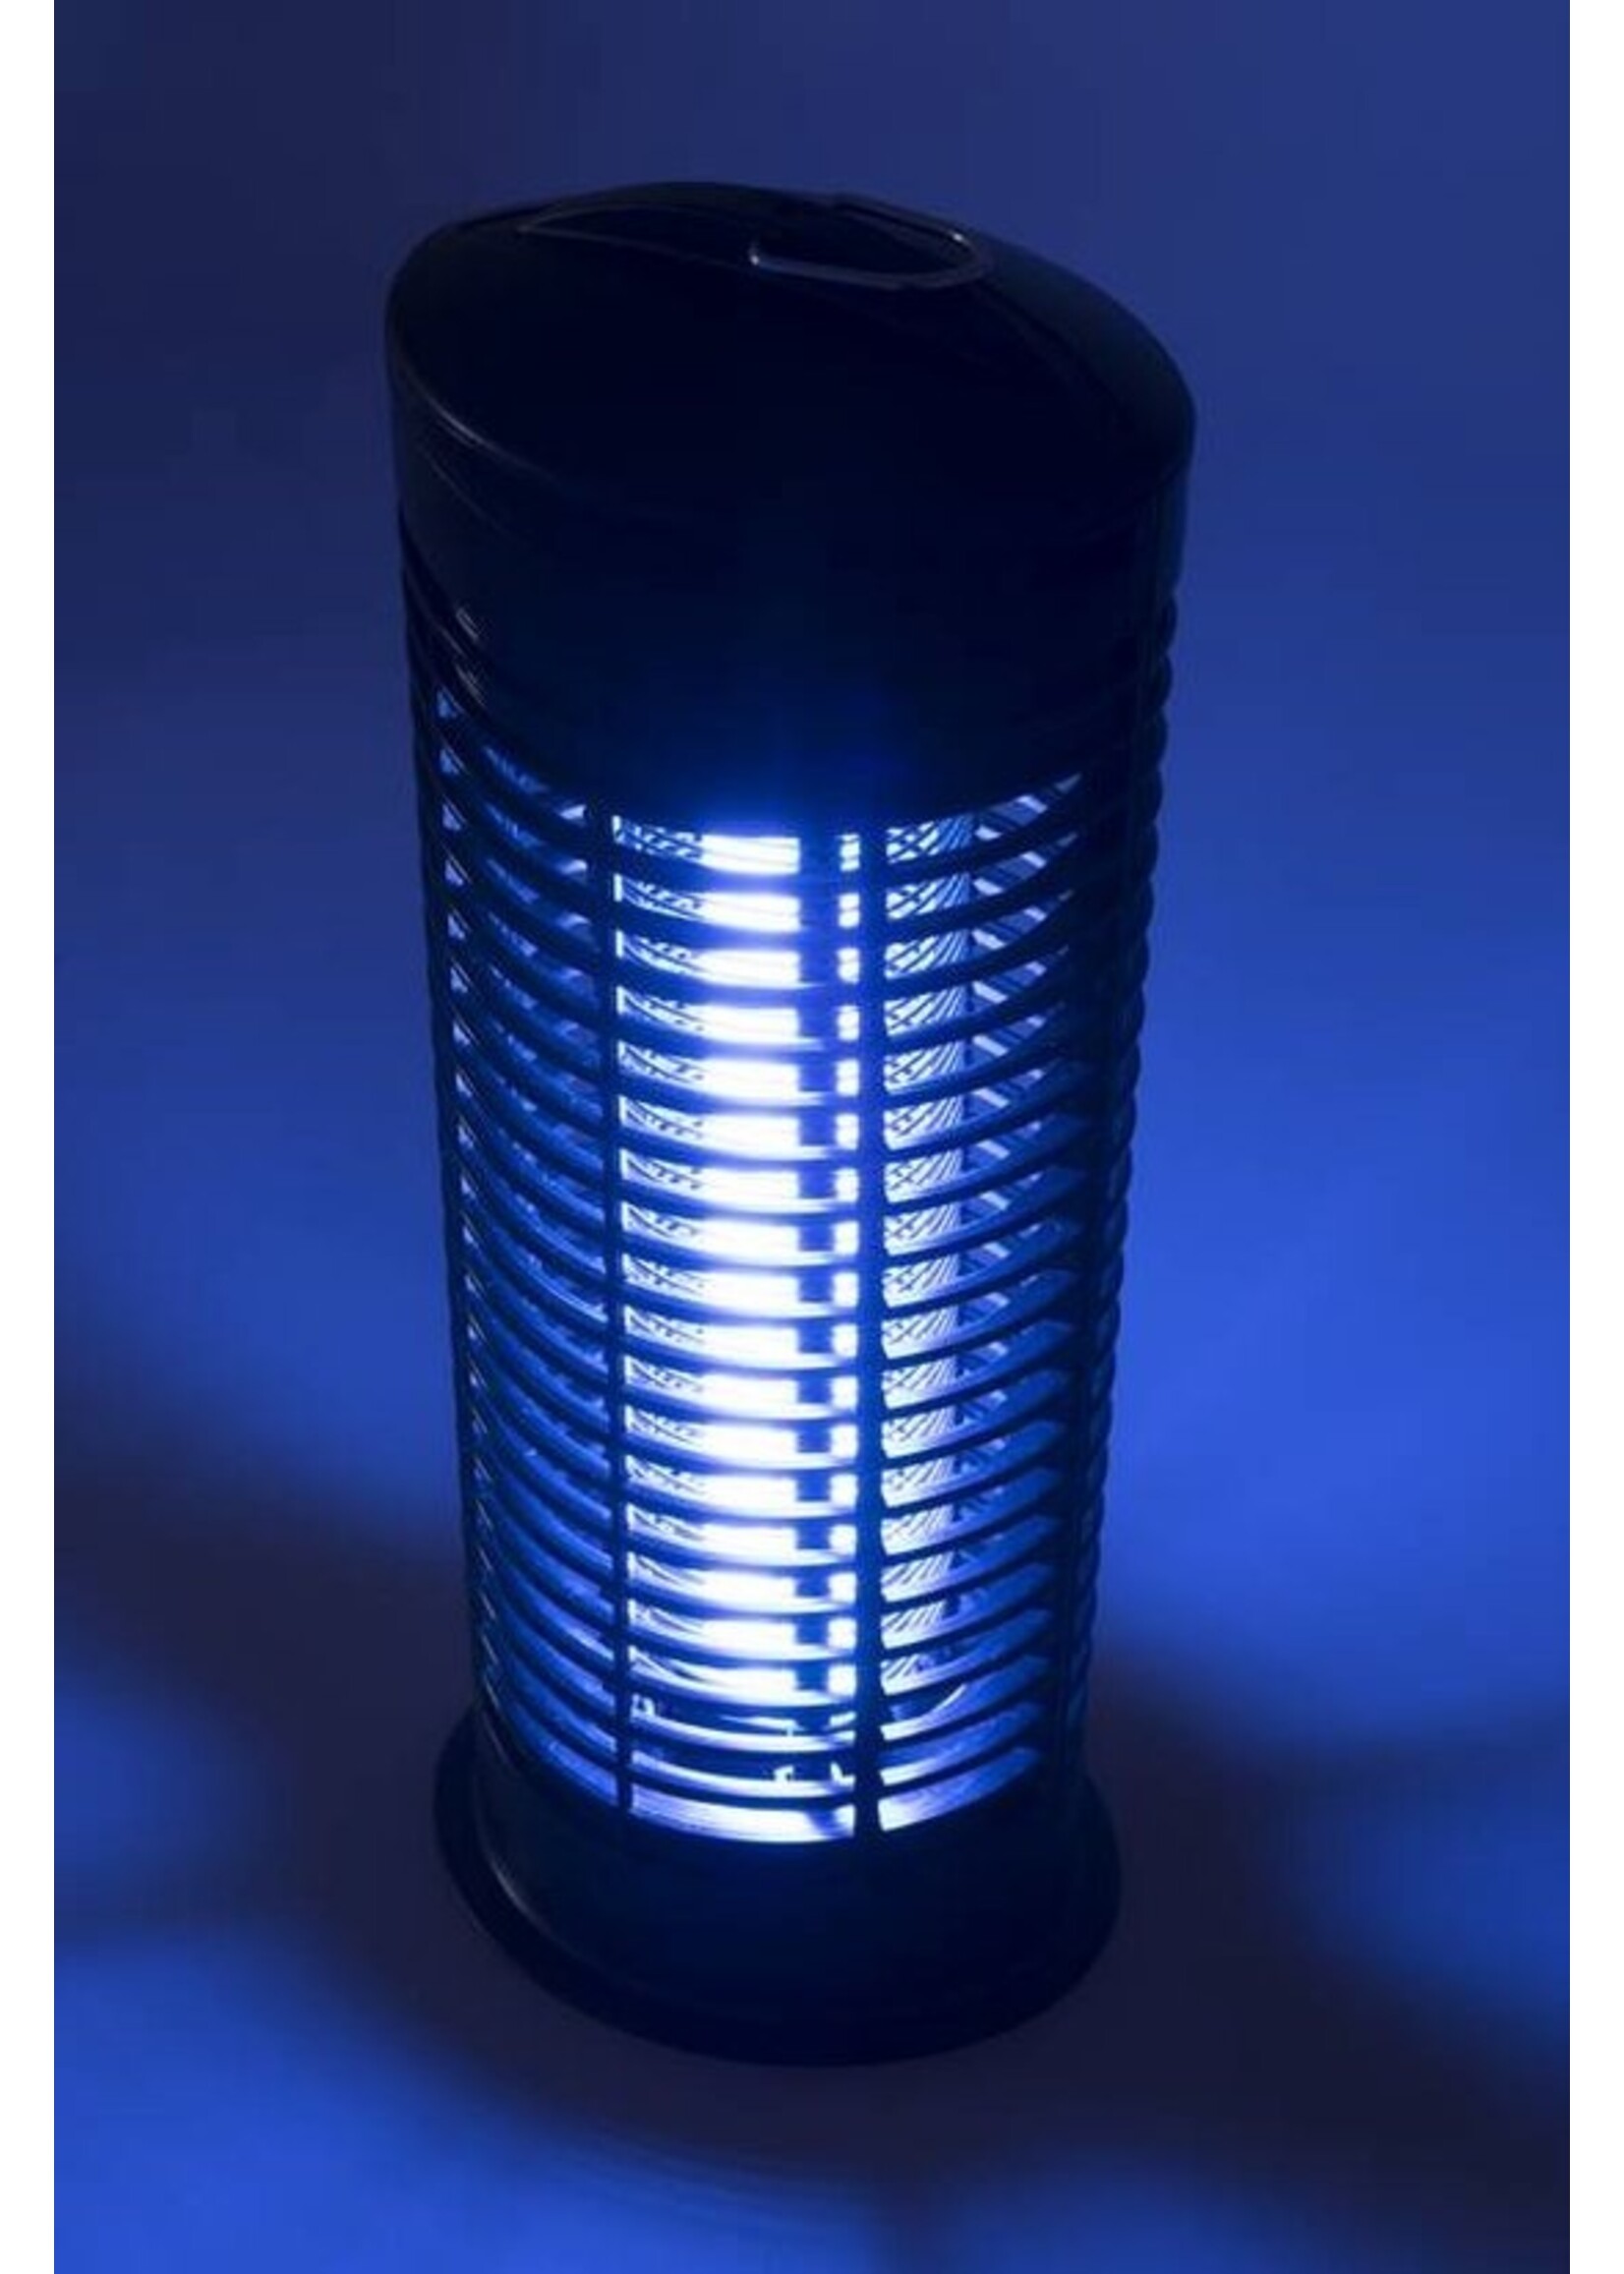 Fly Away 11 Oval Insect Killer | Vliegenlamp